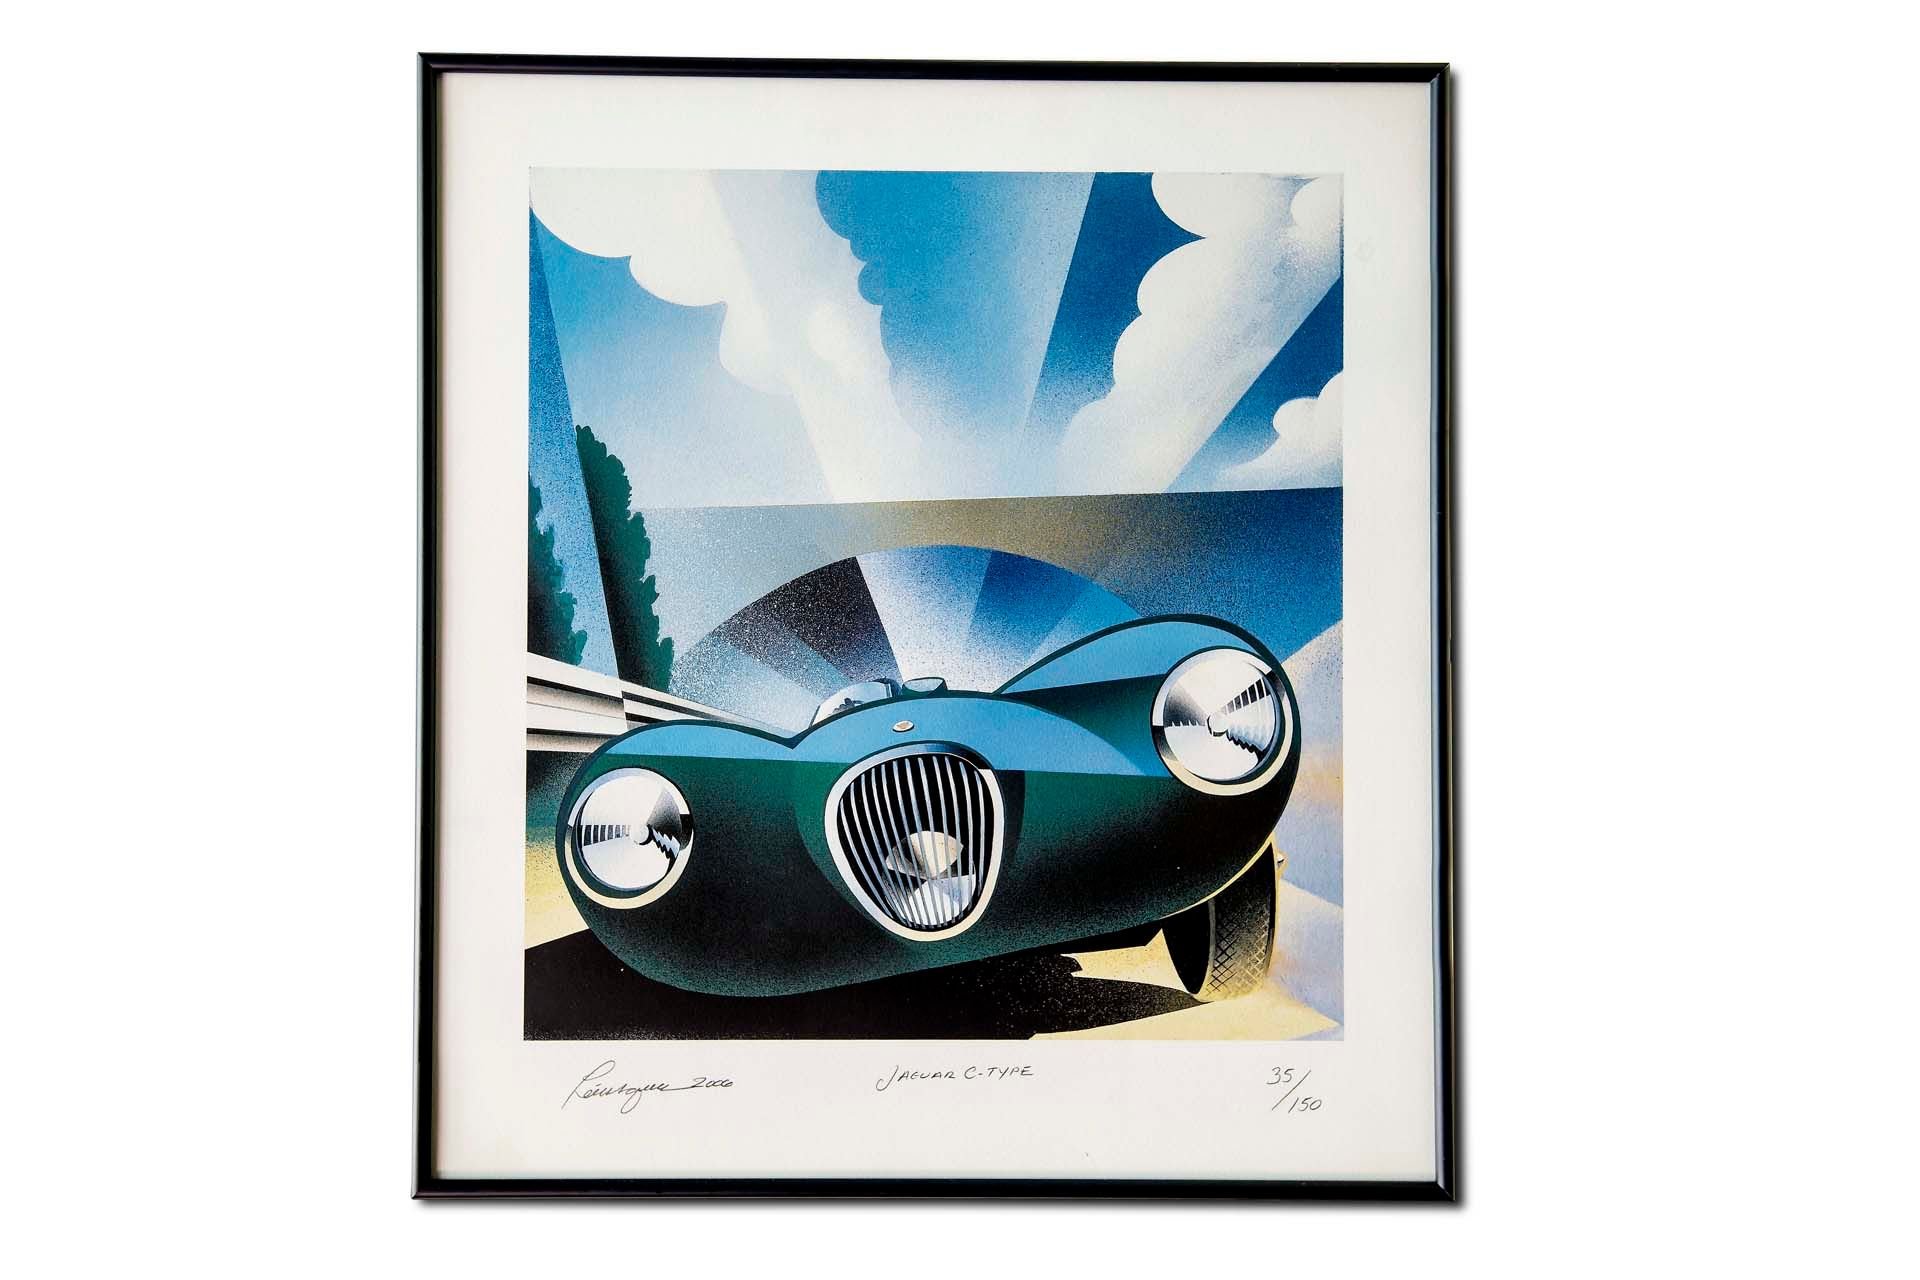 Framed 'Jaguar C-Type' Limited Edition Lithograph 35/150 | Passion for ...